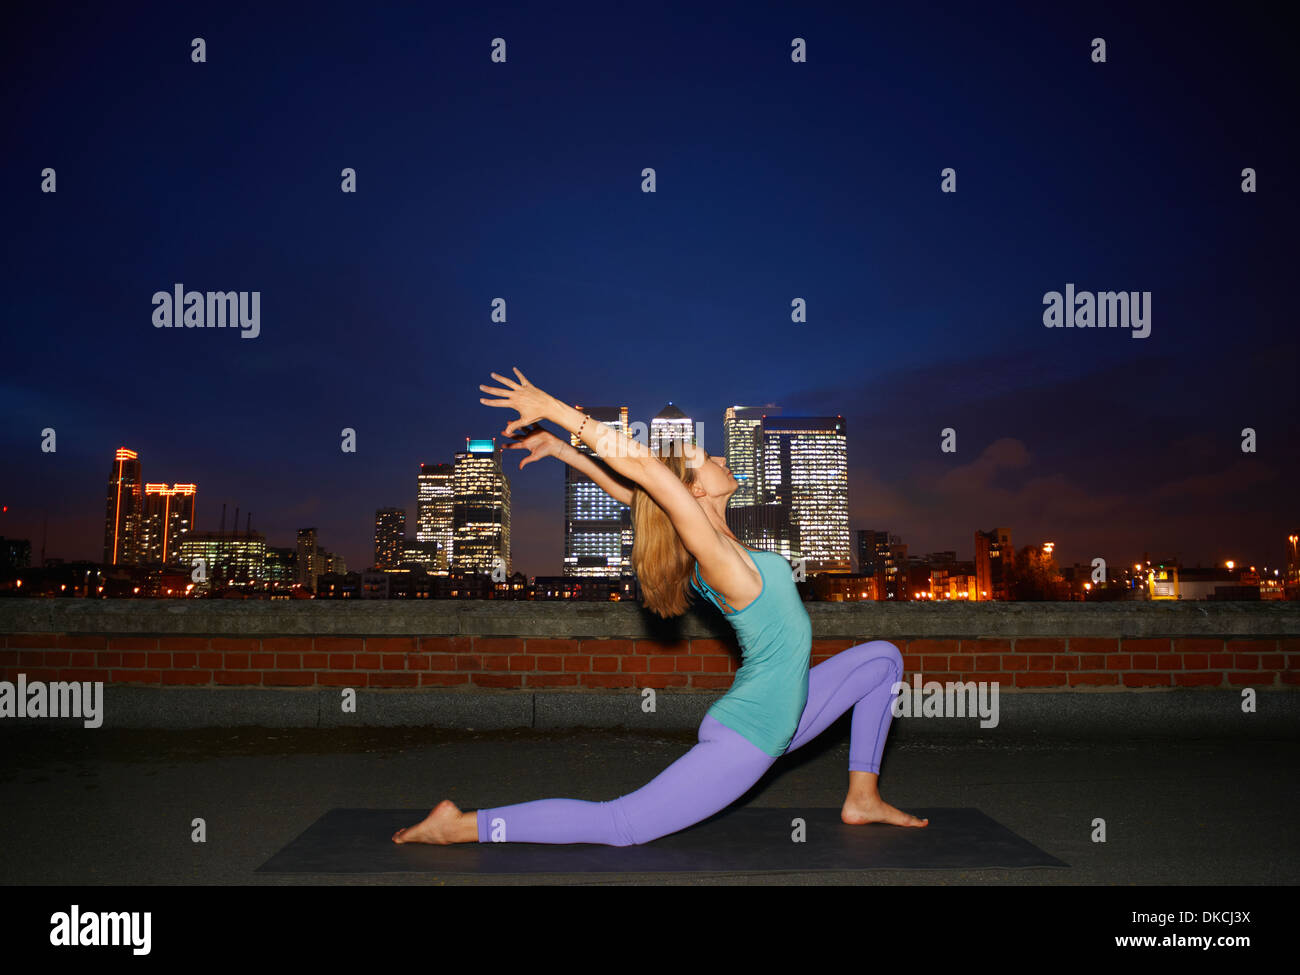 Mid adult woman doing yoga on city rooftop at night Stock Photo